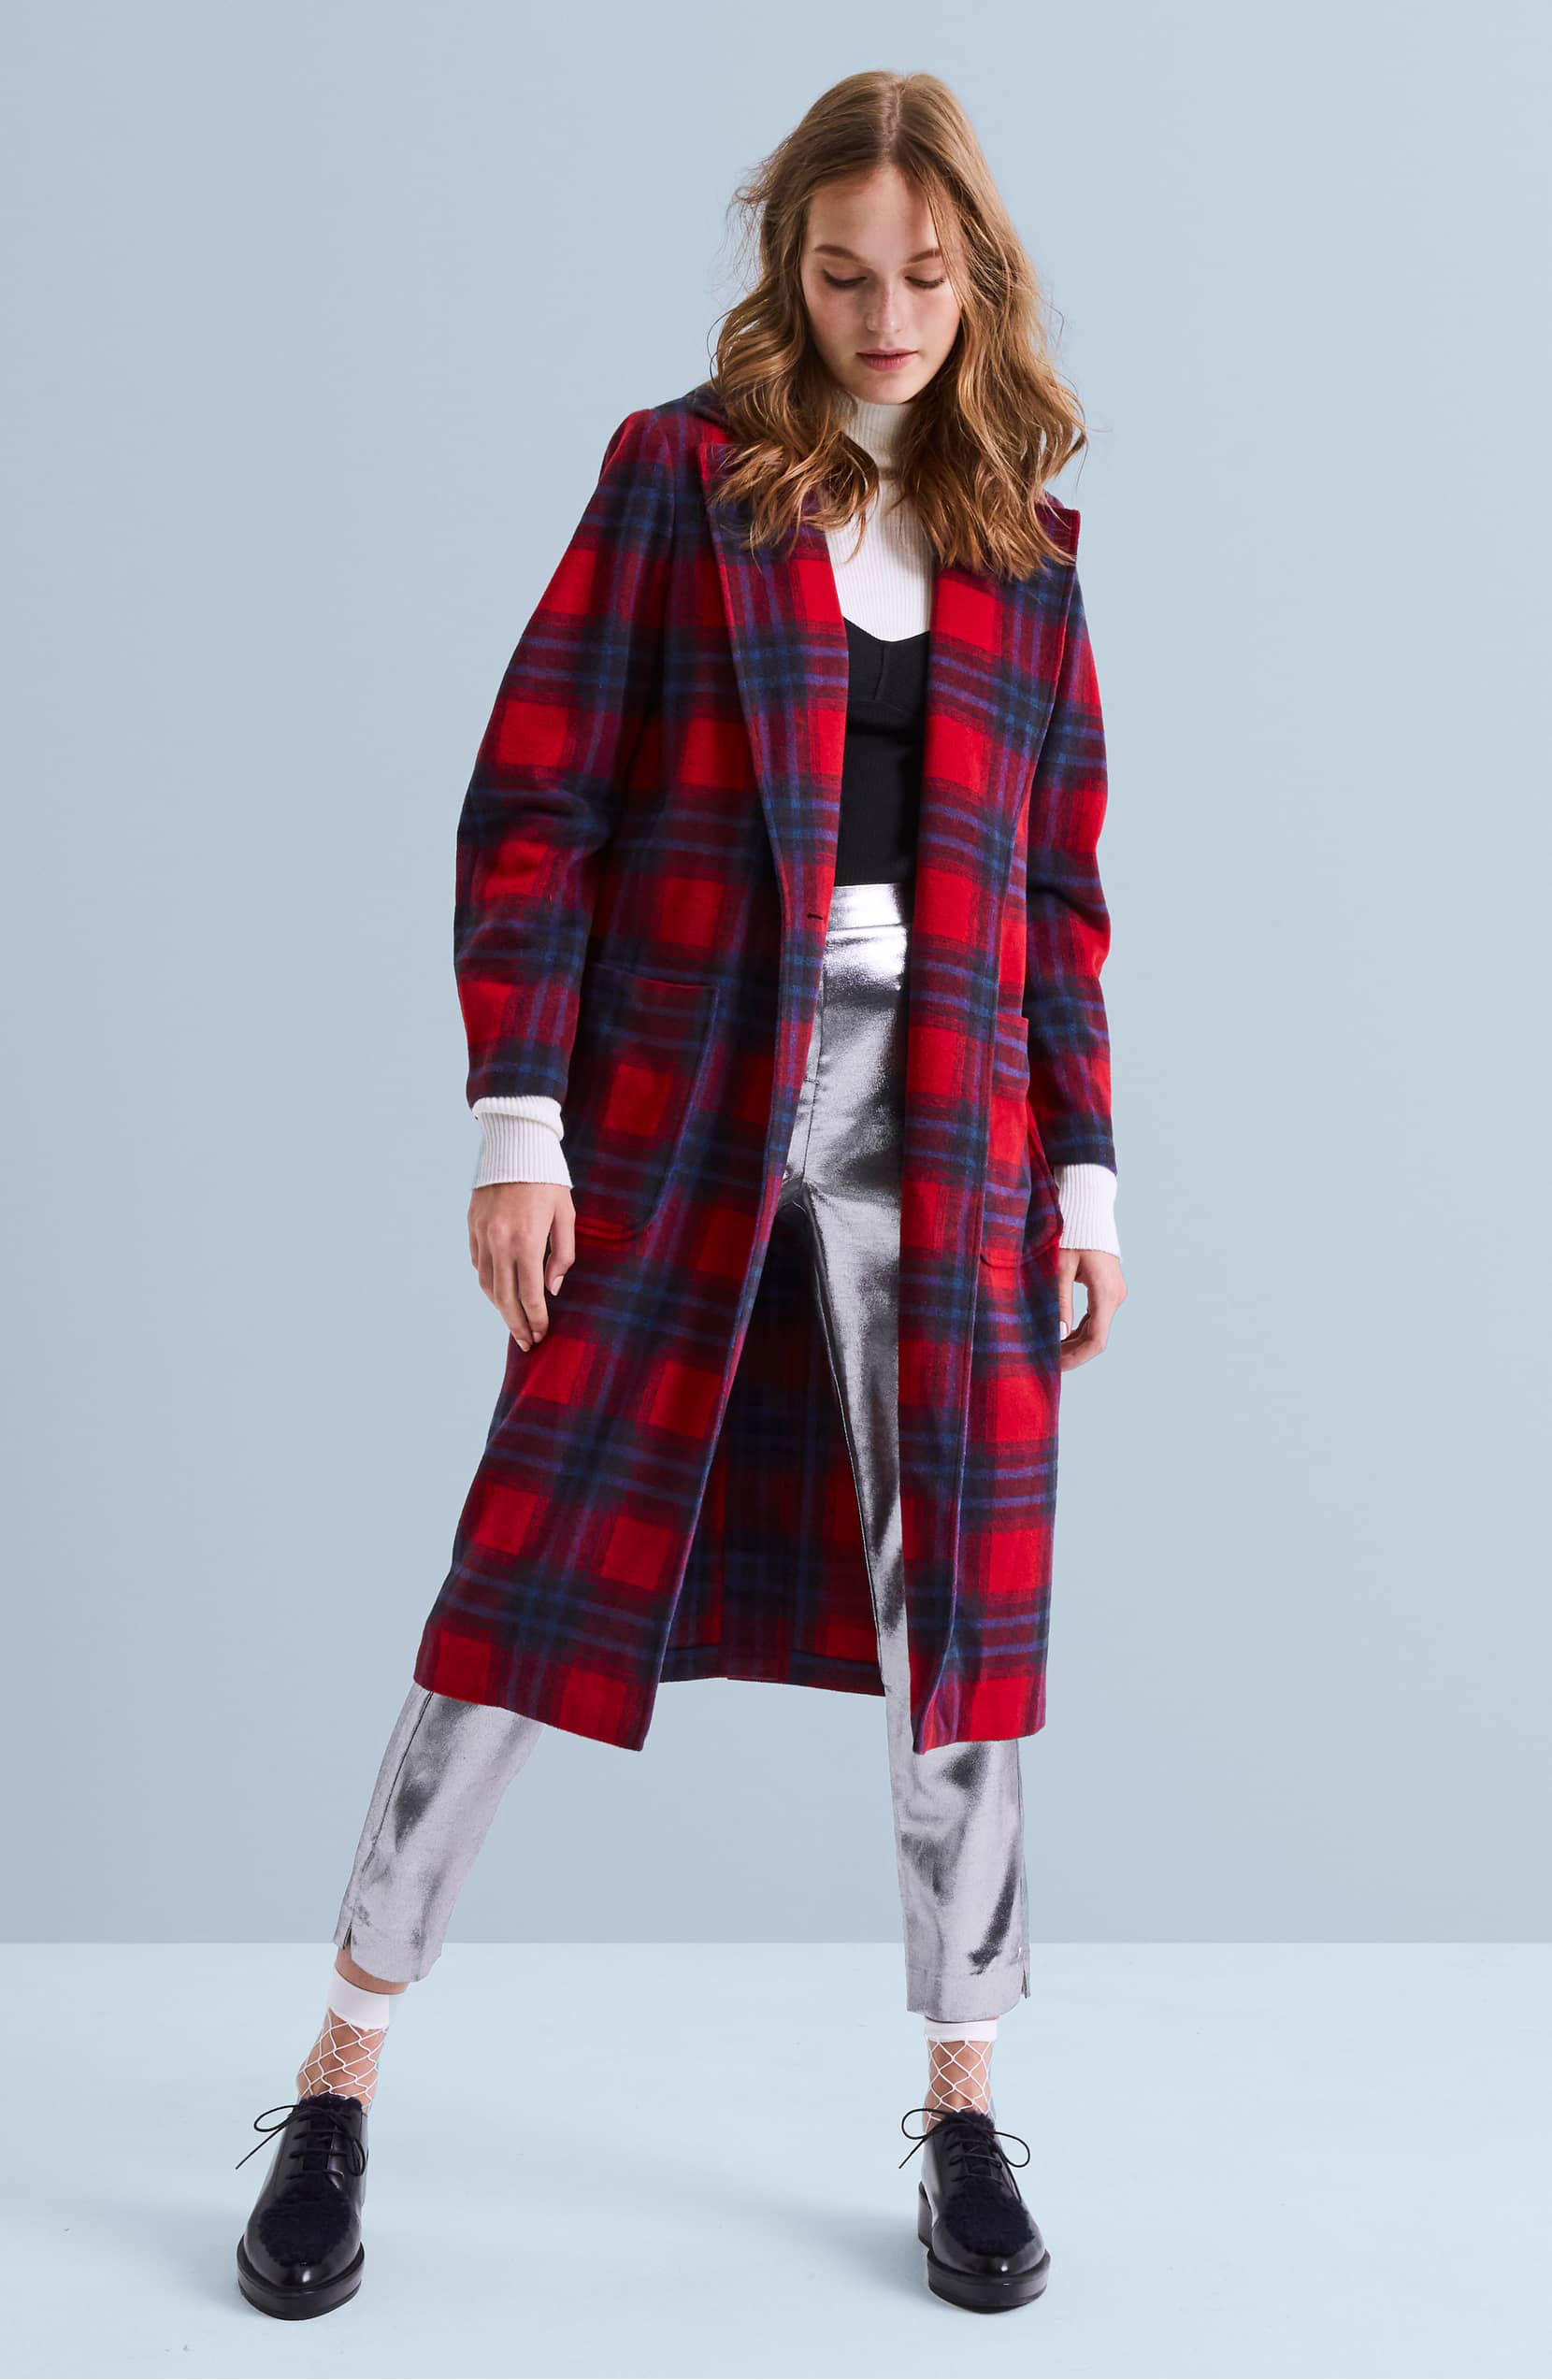 Plaid Outfits To Get You Through Holidays in Style